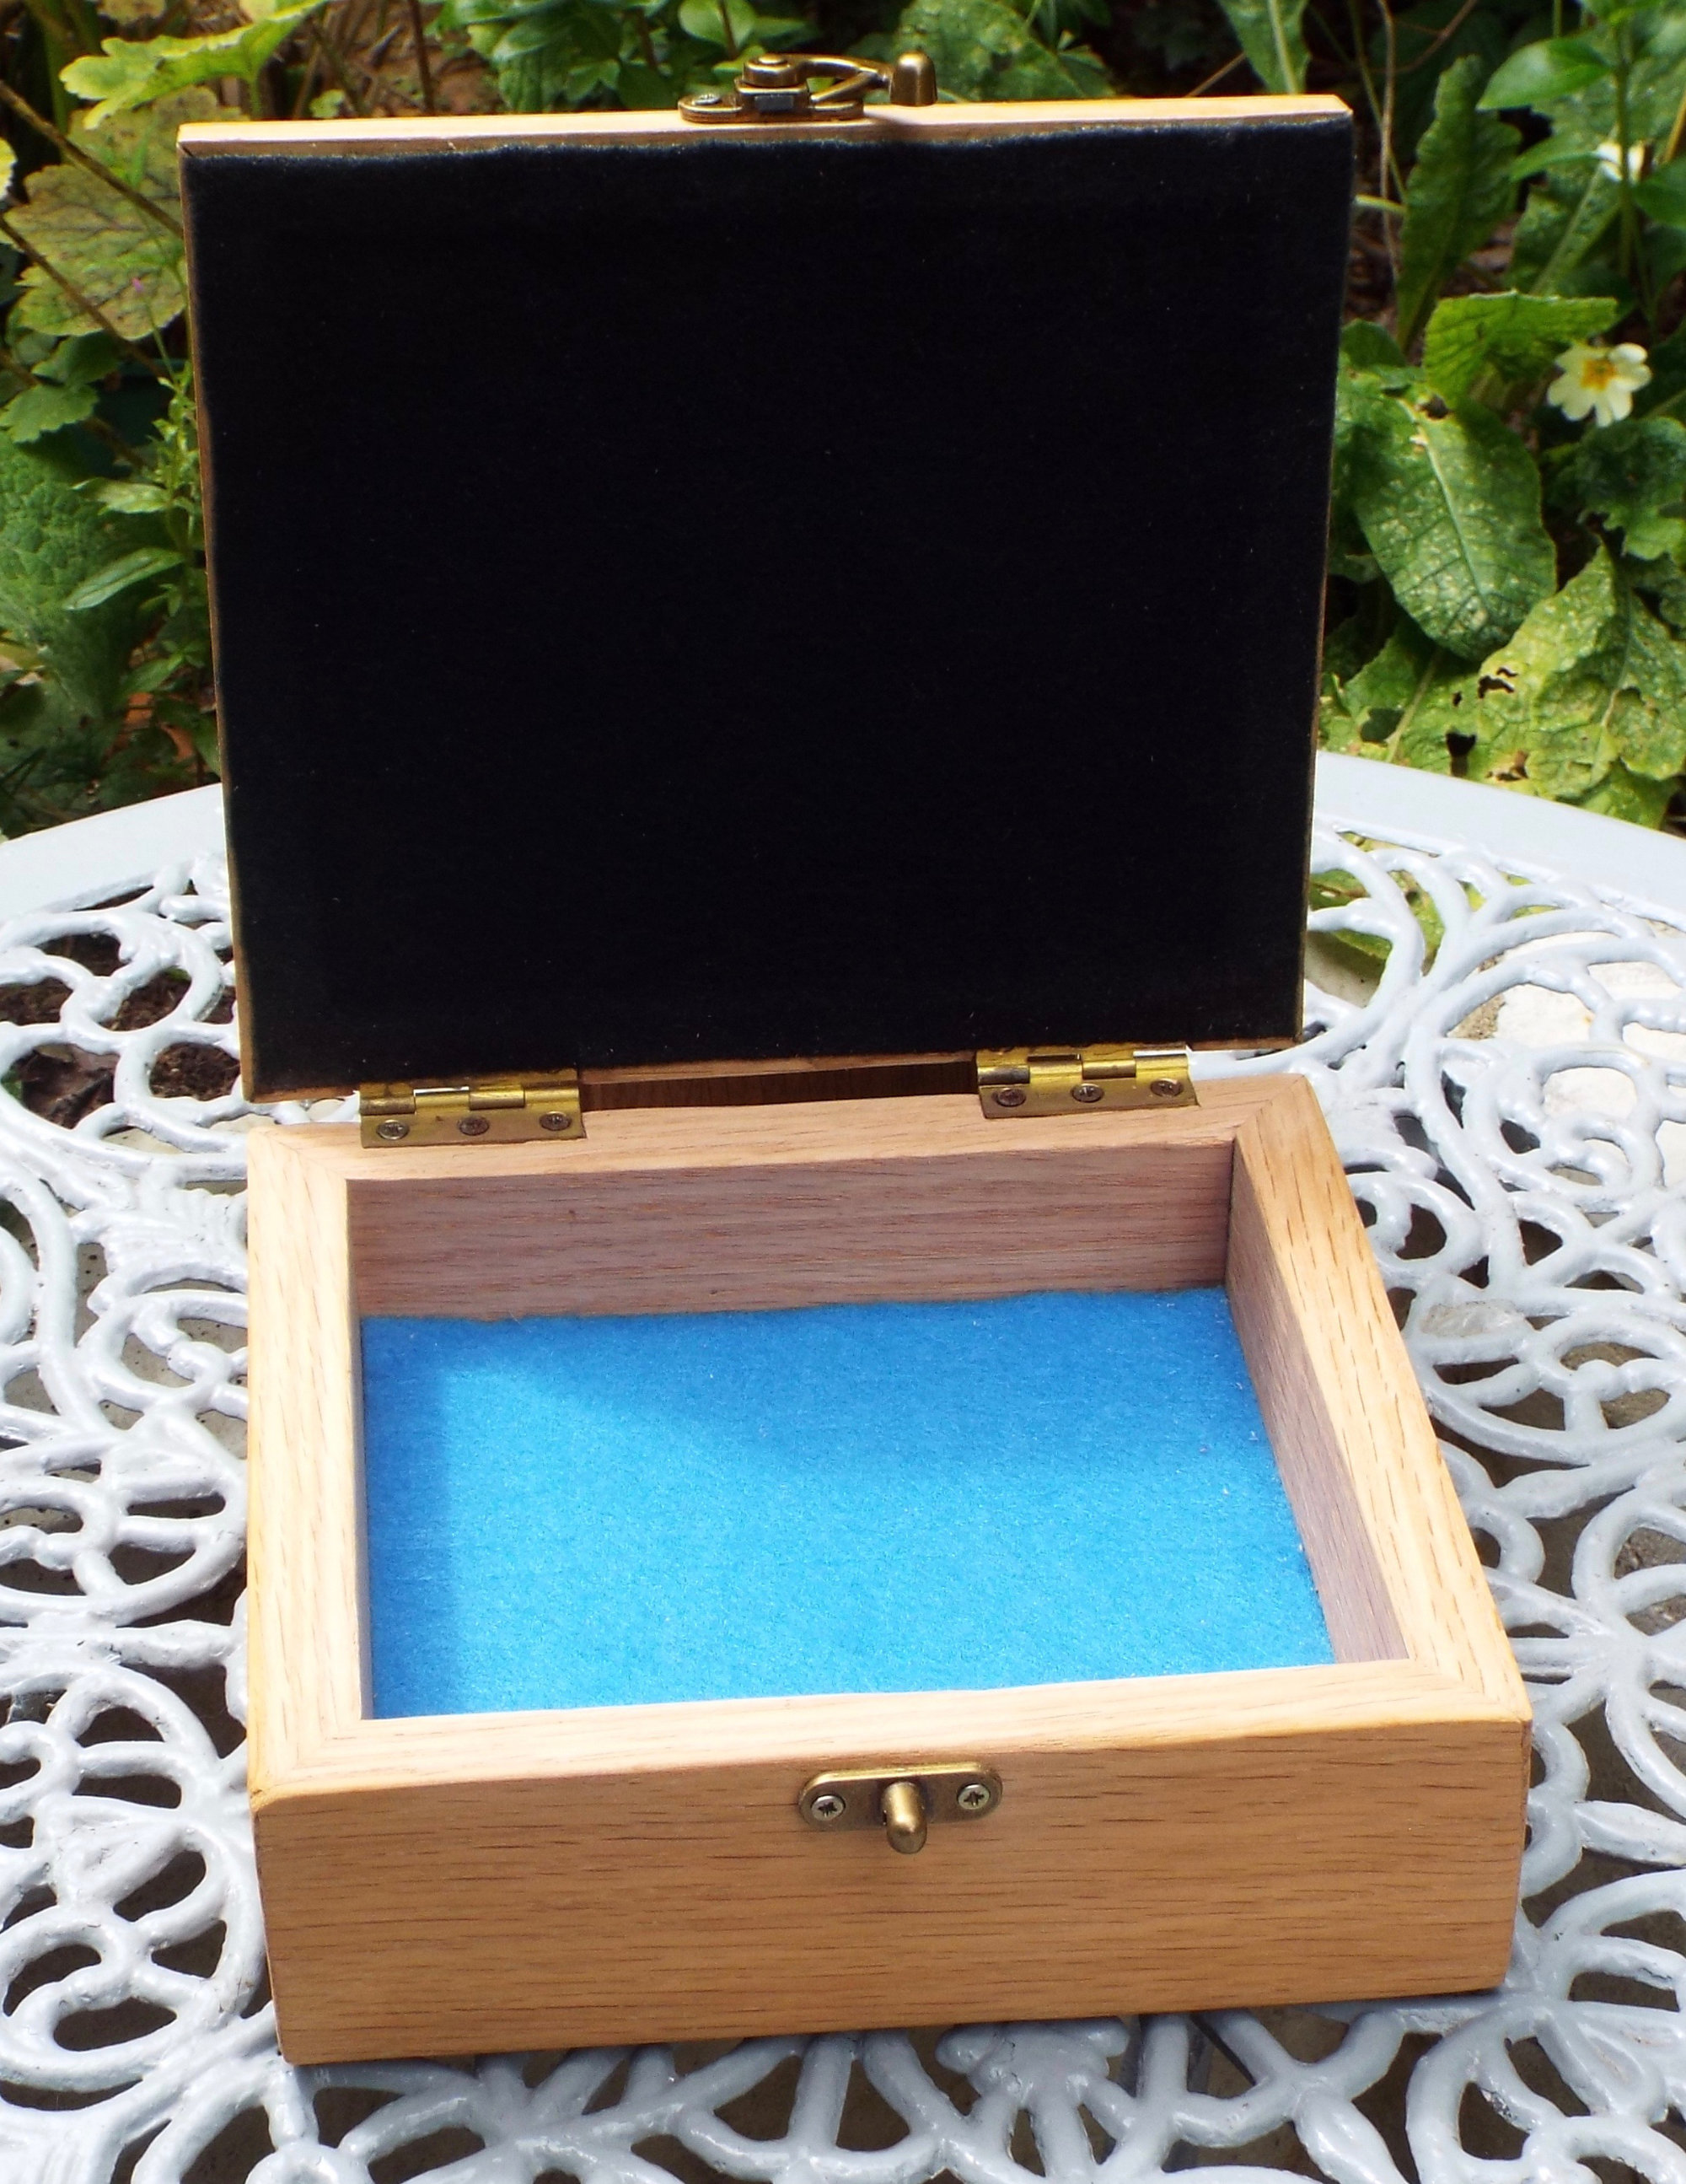 Heirloom wooden box by Richard Woodgate.